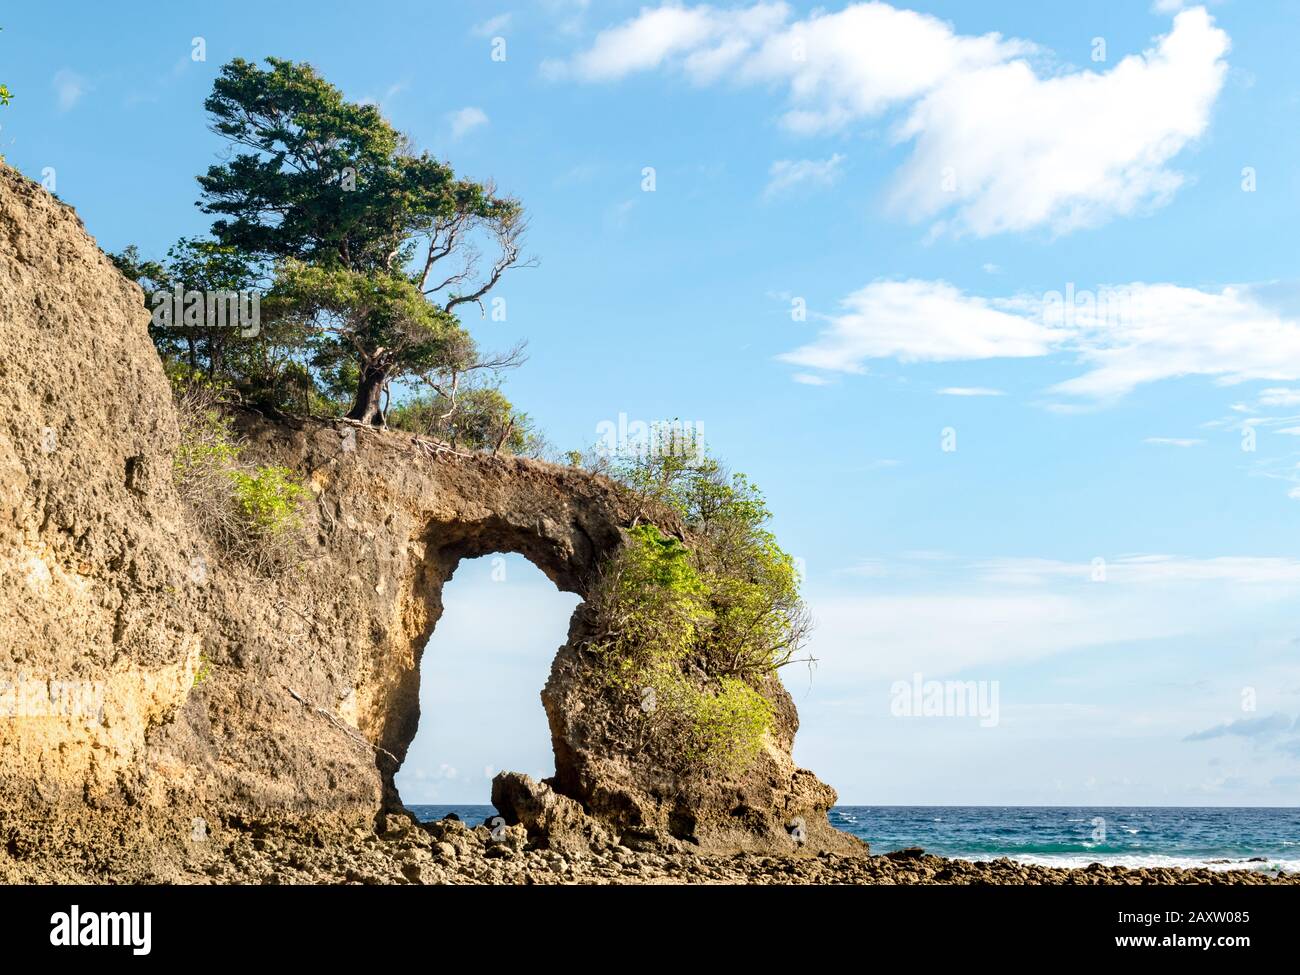 Geological formation of Rock Arch at Neil island, looks like natural bridge or a natural gate, formed off constant erosion; with calm sea and blue sky Stock Photo